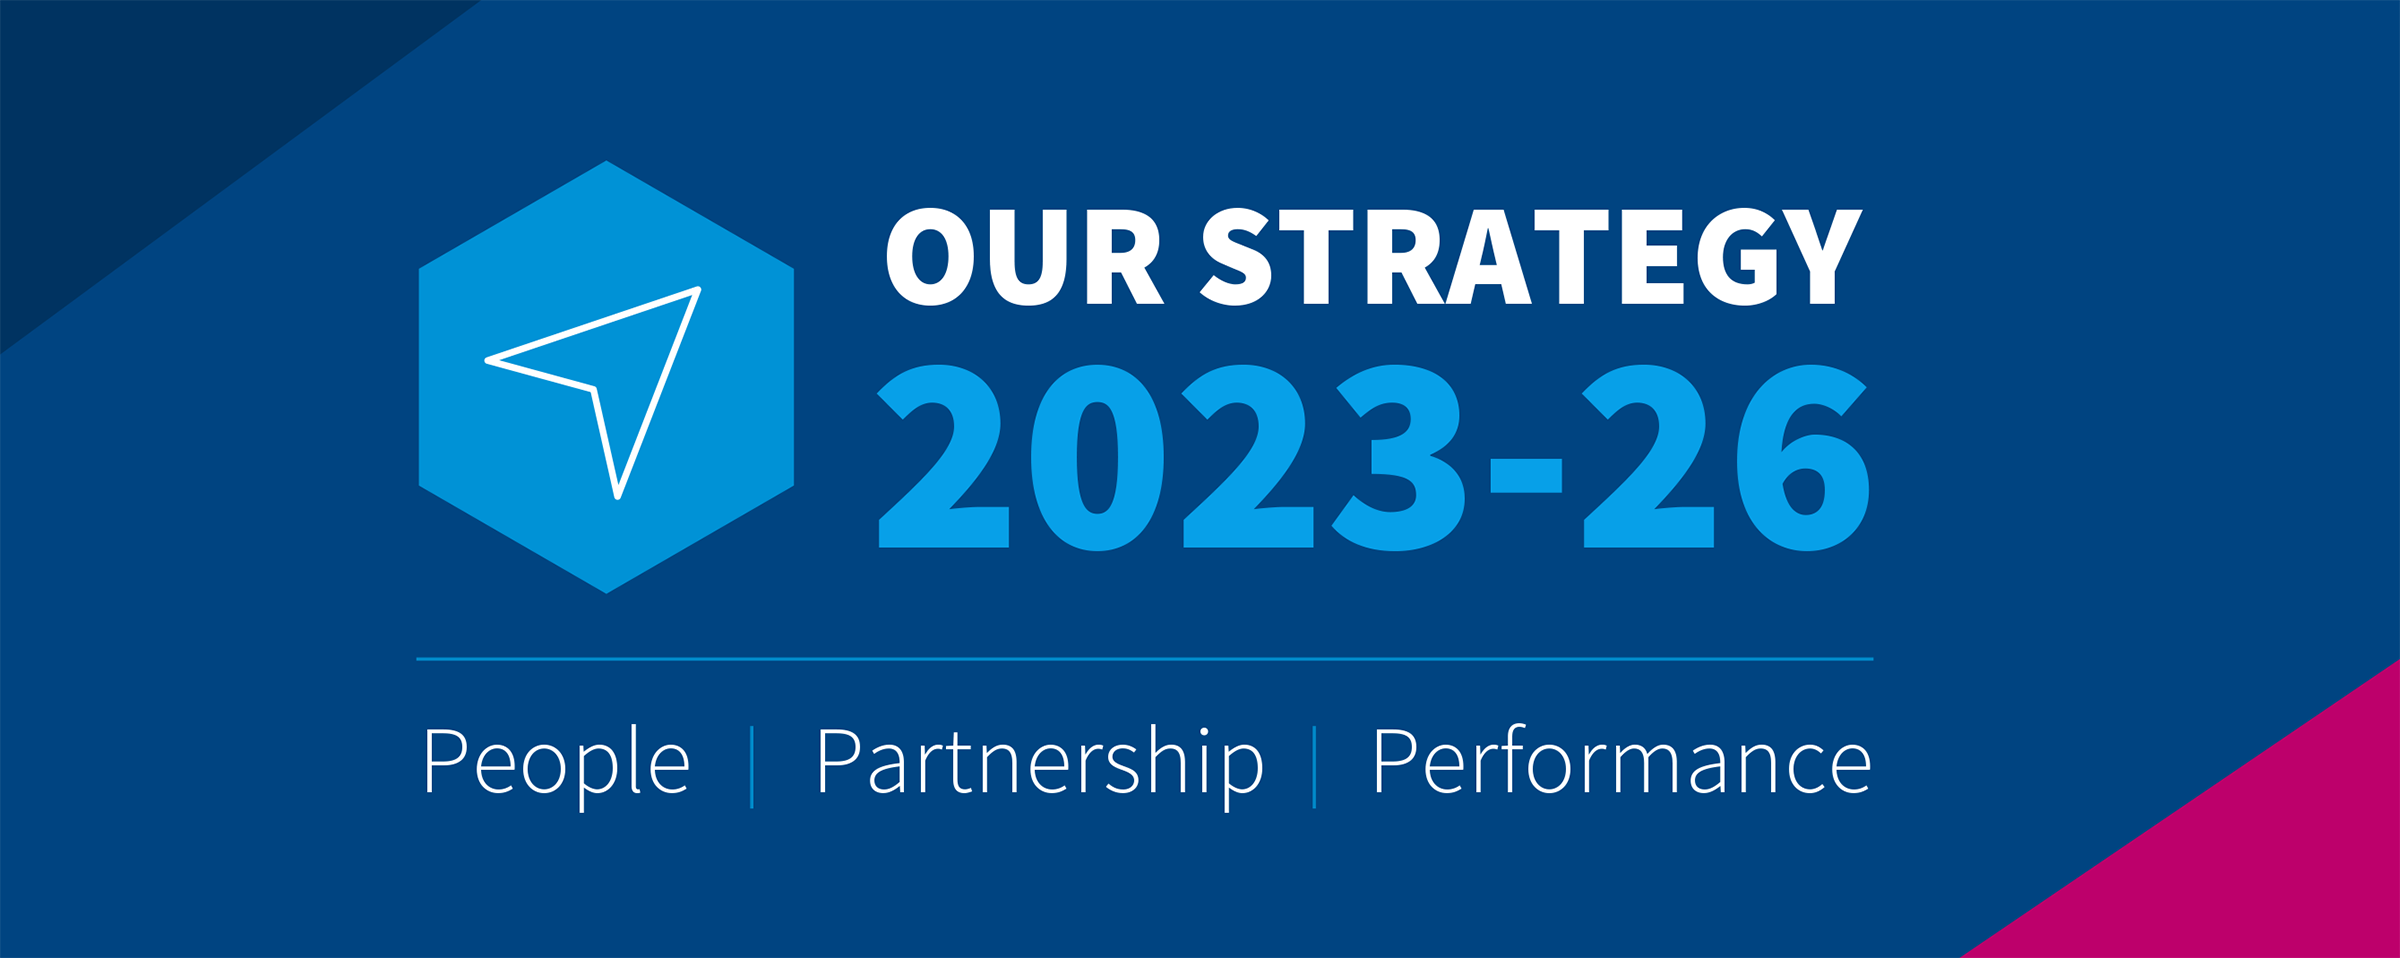 NES corporate strategy 2023 -2026